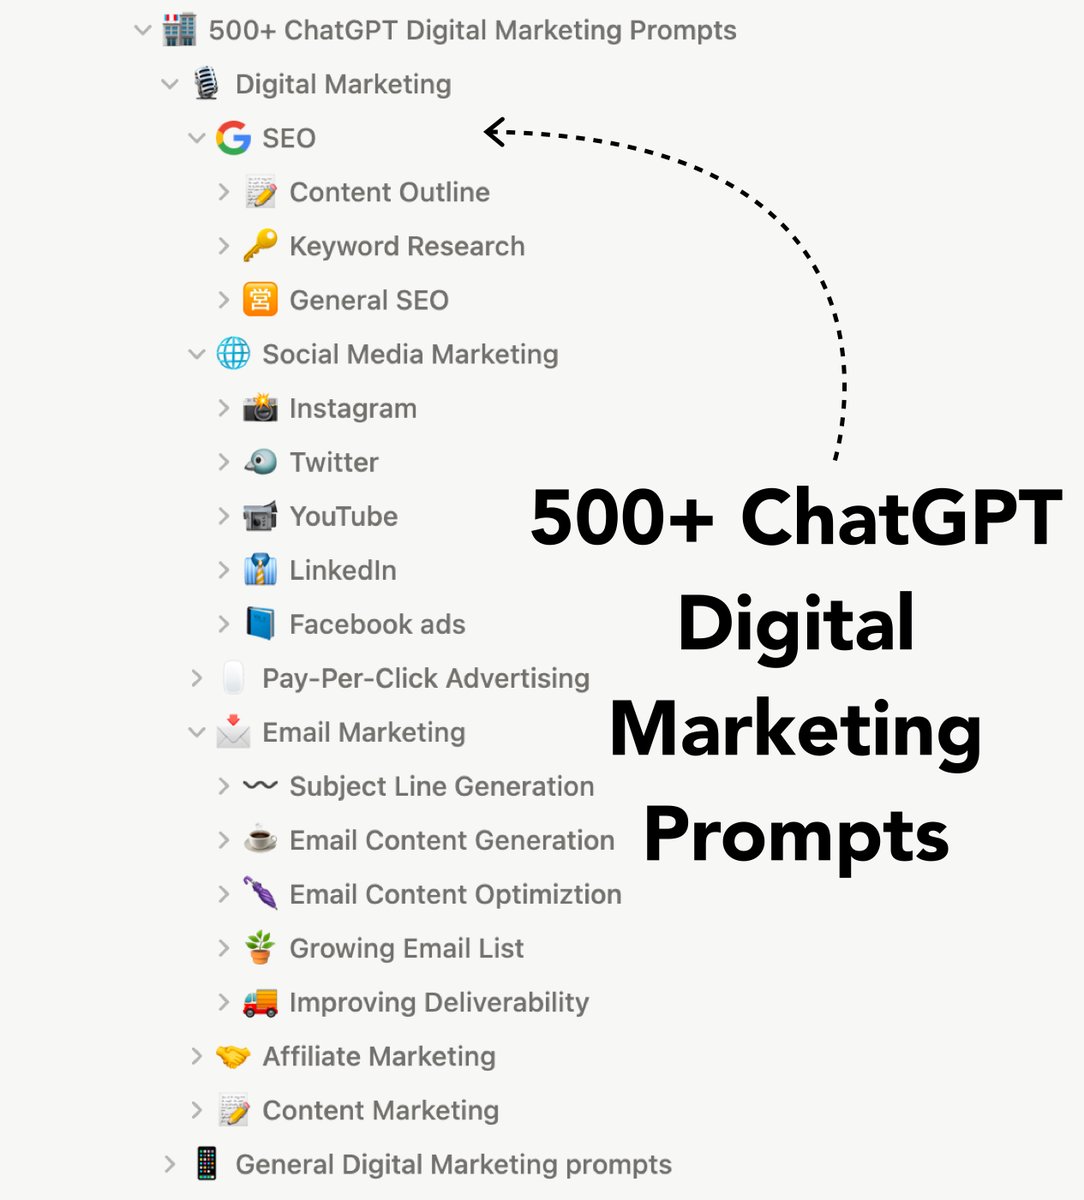 I've prepared a Notion resource that contains 500+ ChatGPT Digital Marketing Prompts

It is FREE today.

But after 24 hours, it will cost $$$  

To get it,

1) Follow me (so that I can DM you)
2) Like 
3) Retweet 
4) Comment '😎'  

And I'll send it to you for FREE